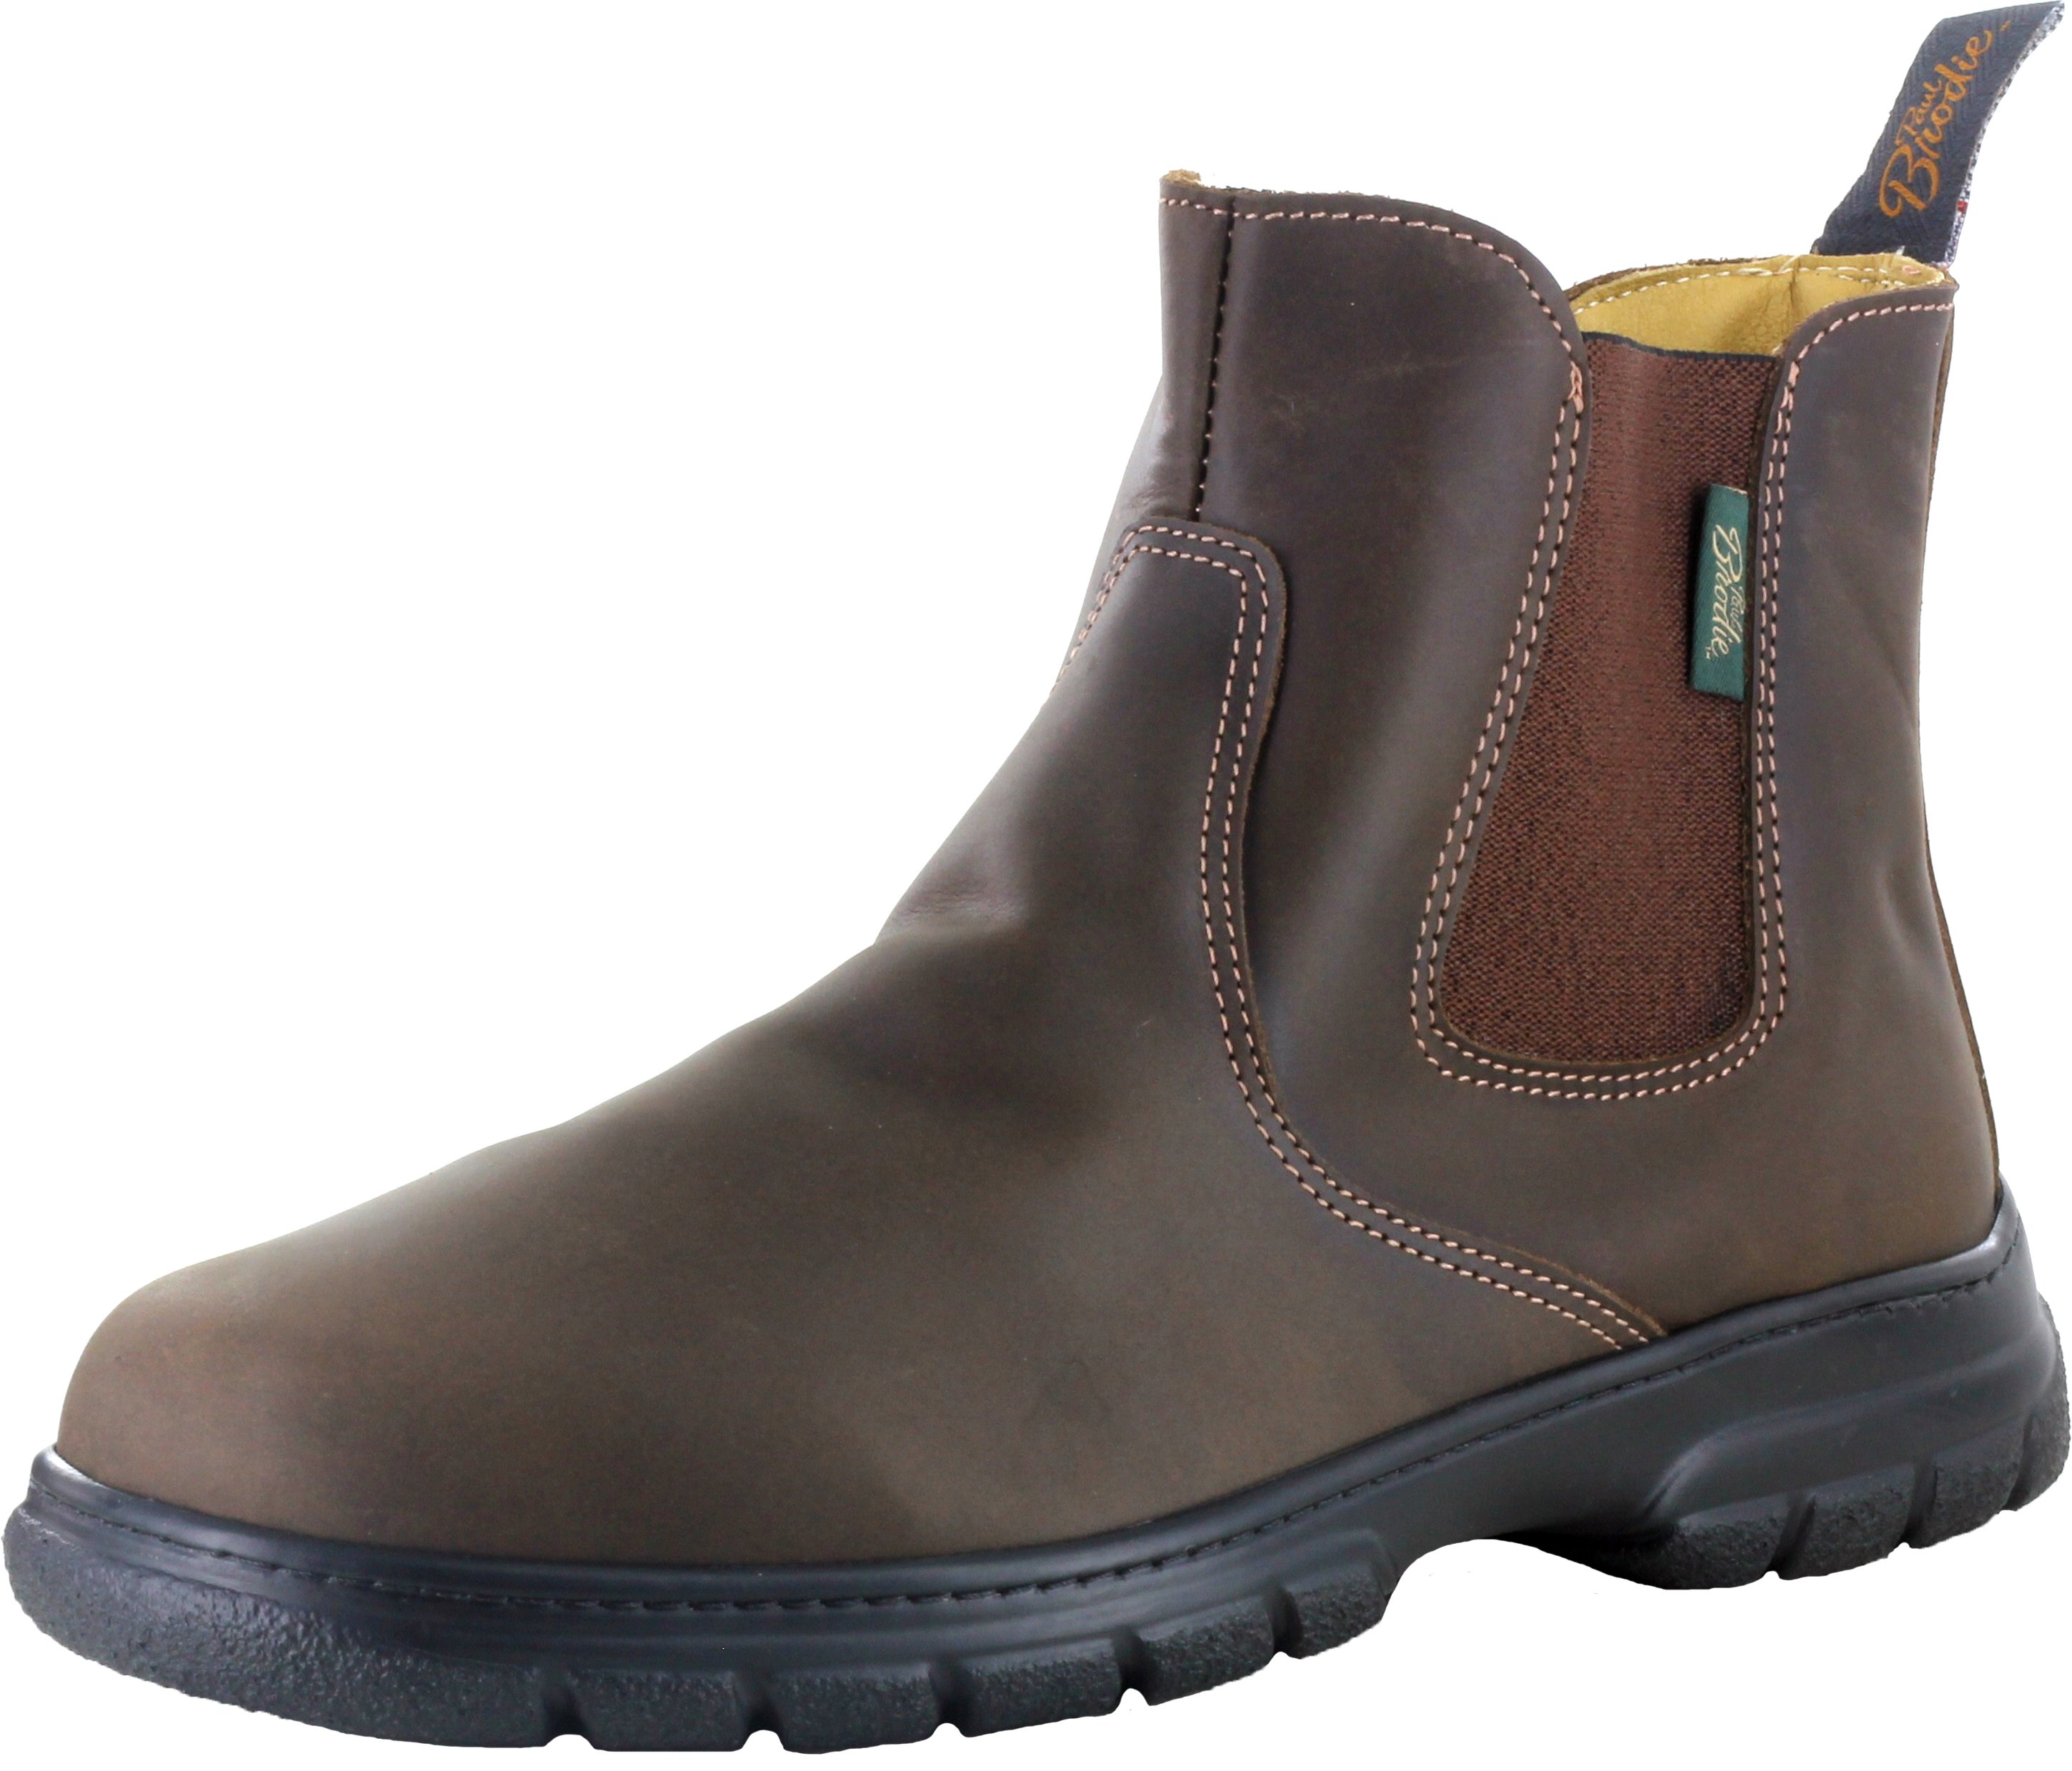 Paul Brodie Double Gore Boots - Crazy Horse Brown